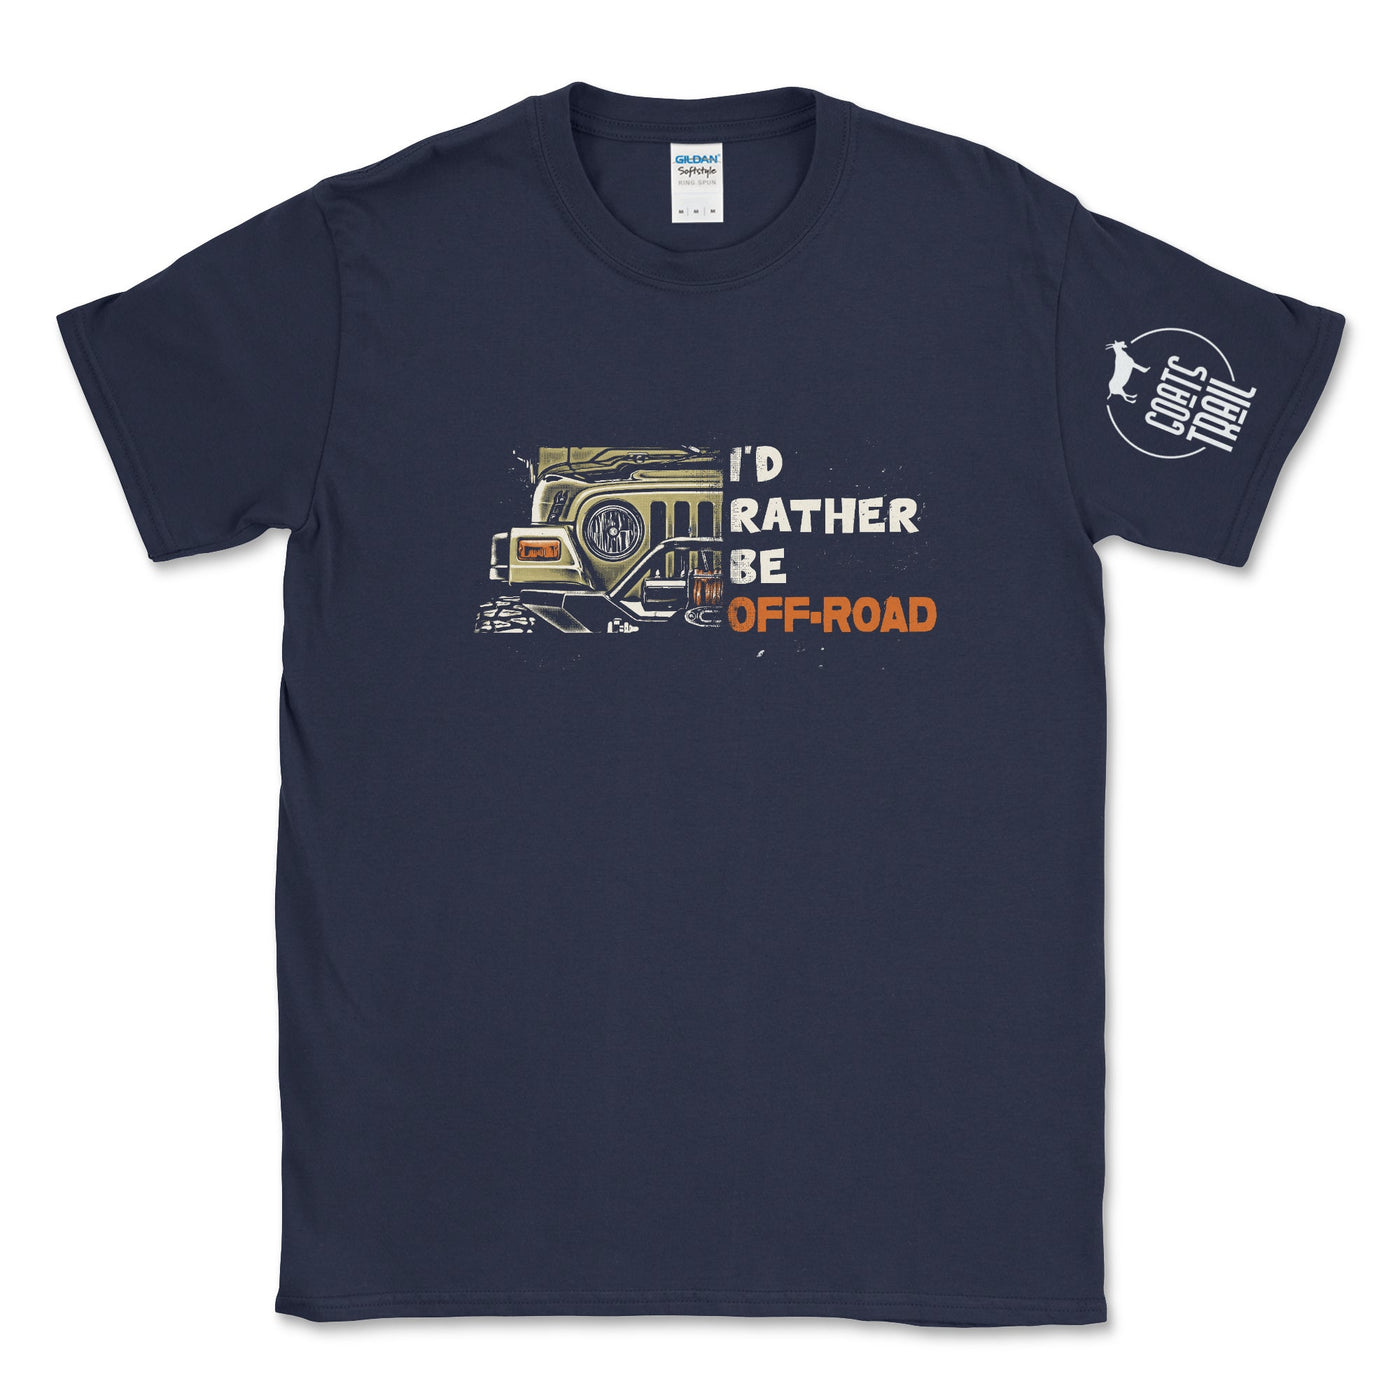 Big and Tall-I'd Rather Be Off Road Shirt - Goats Trail Off-Road Apparel Company